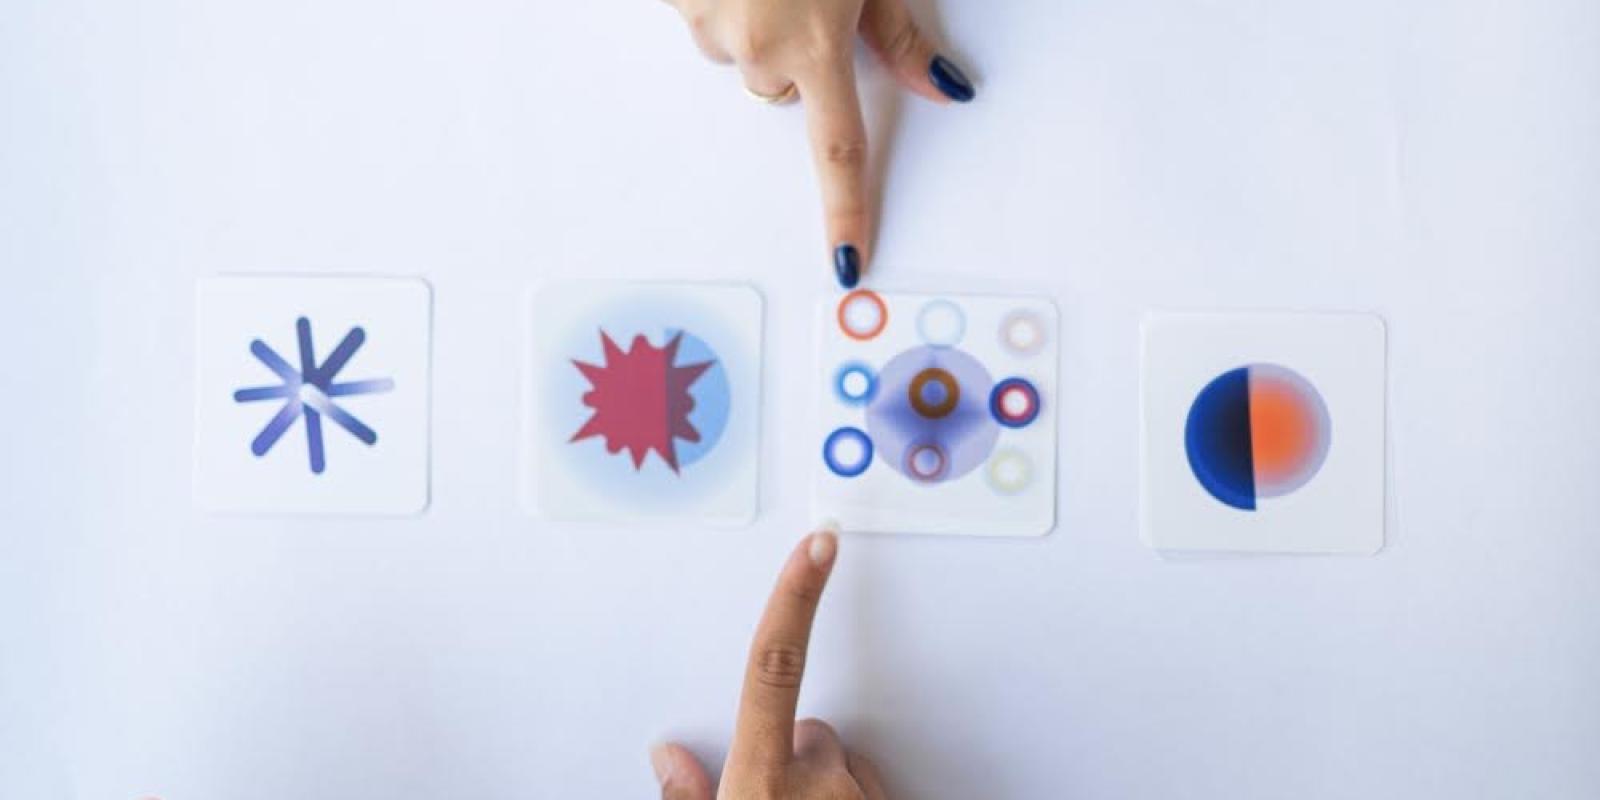 Two hands point to cards showing calming circular graphics